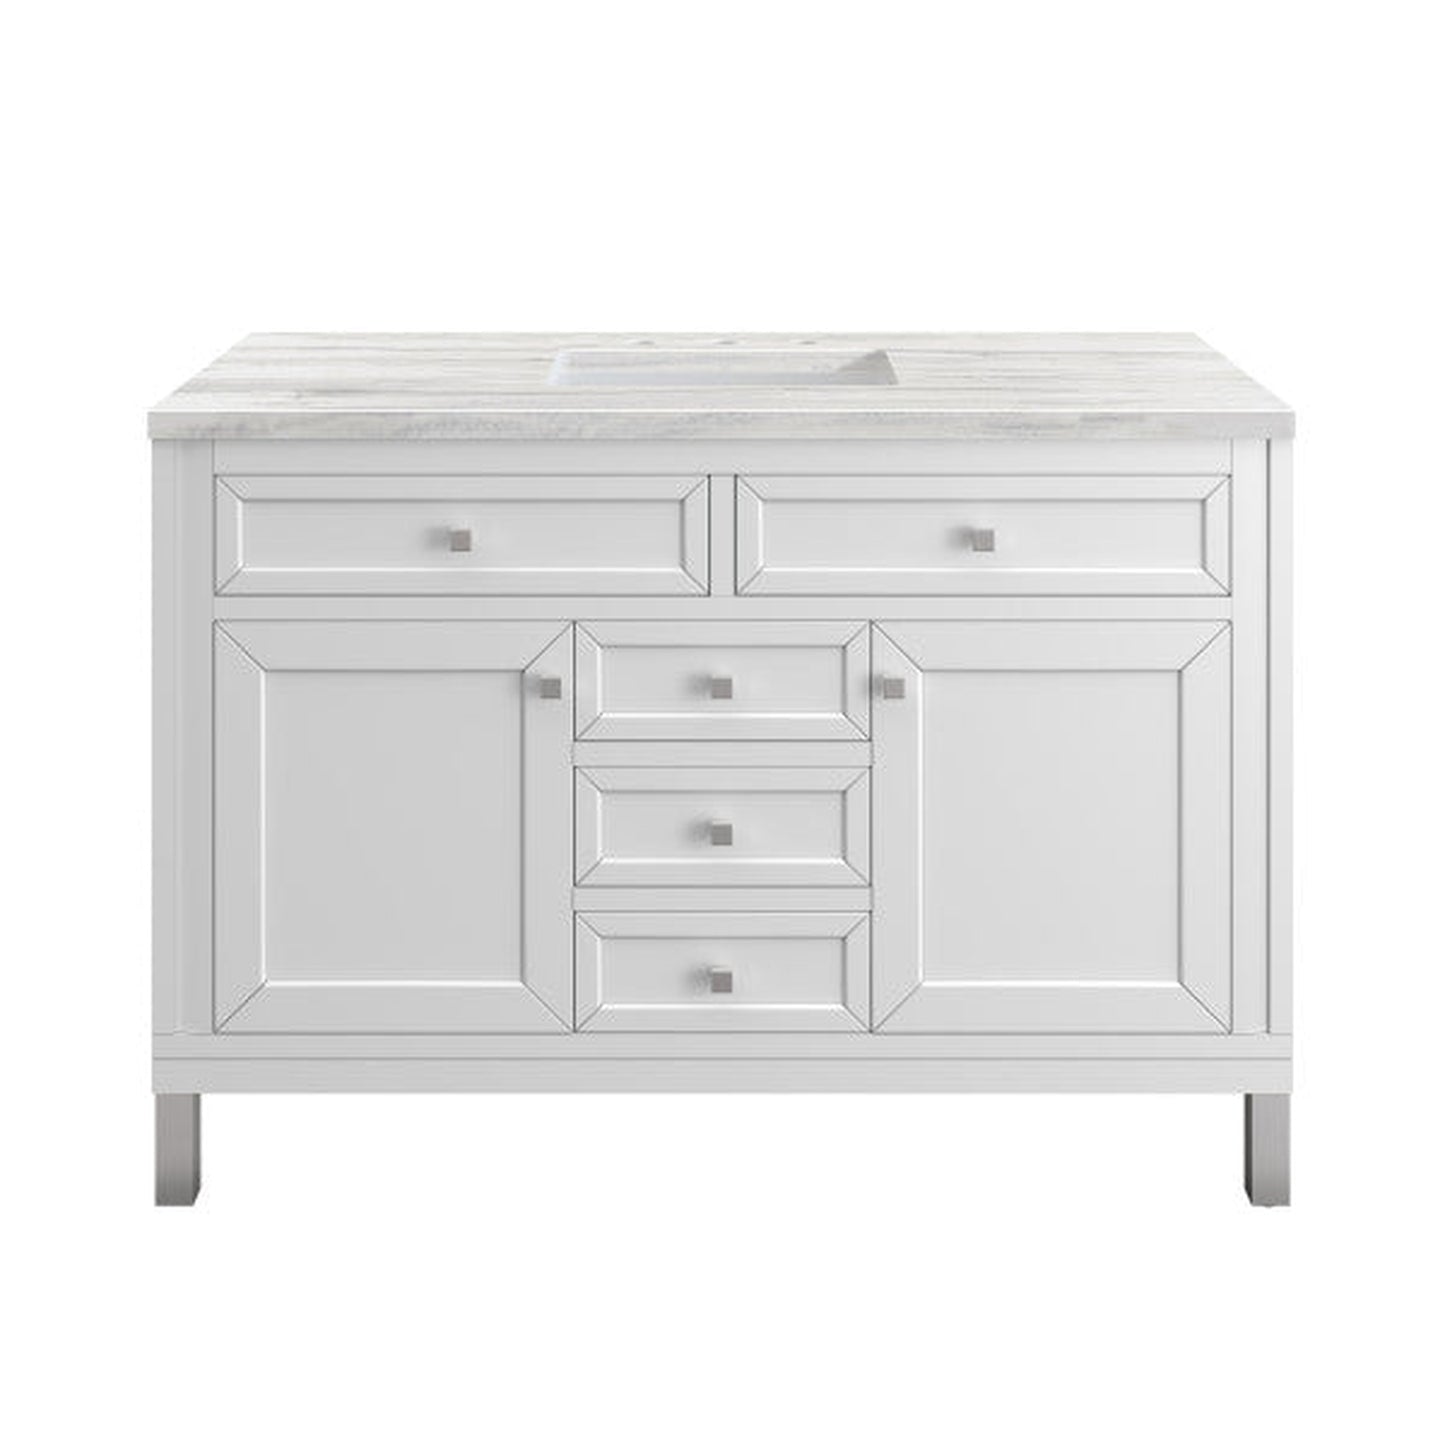 James Martin Vanities Chicago Brushed Nickel Knobs and Legs Set for V48"